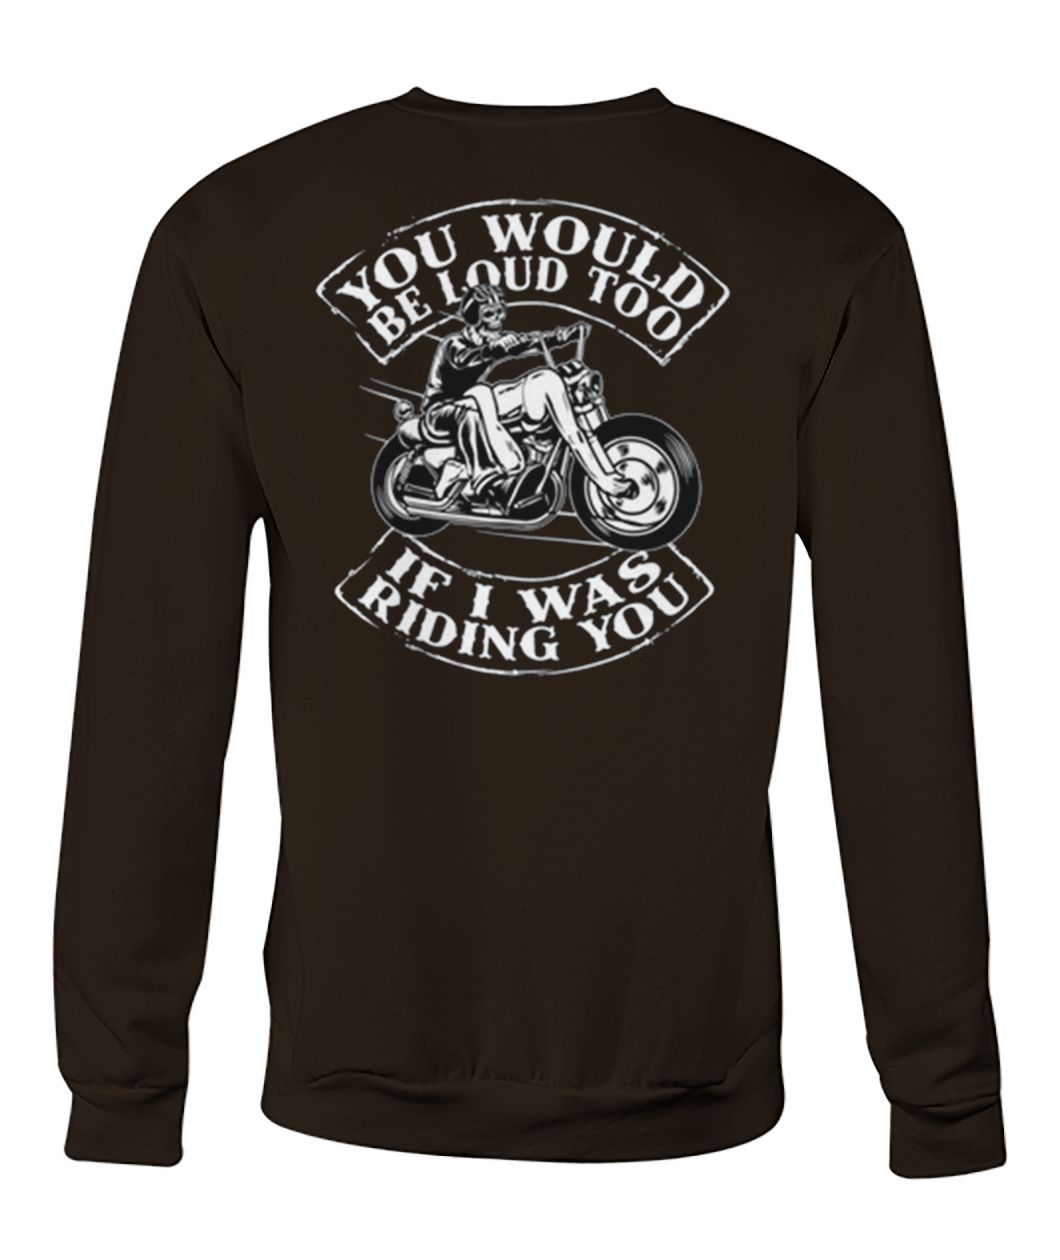 You would be loud too if I was riding you crew neck sweatshirt